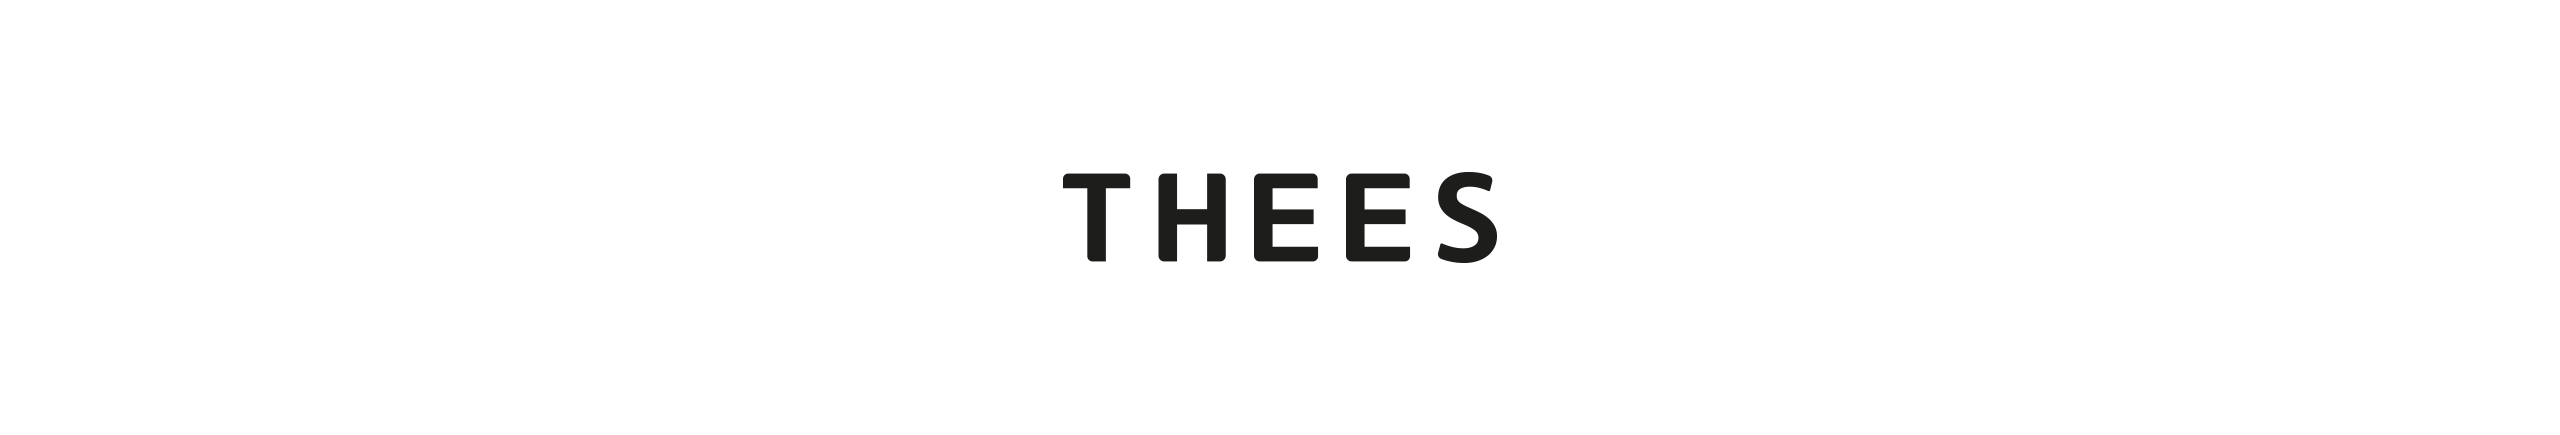 Thorsten Thees's profile banner